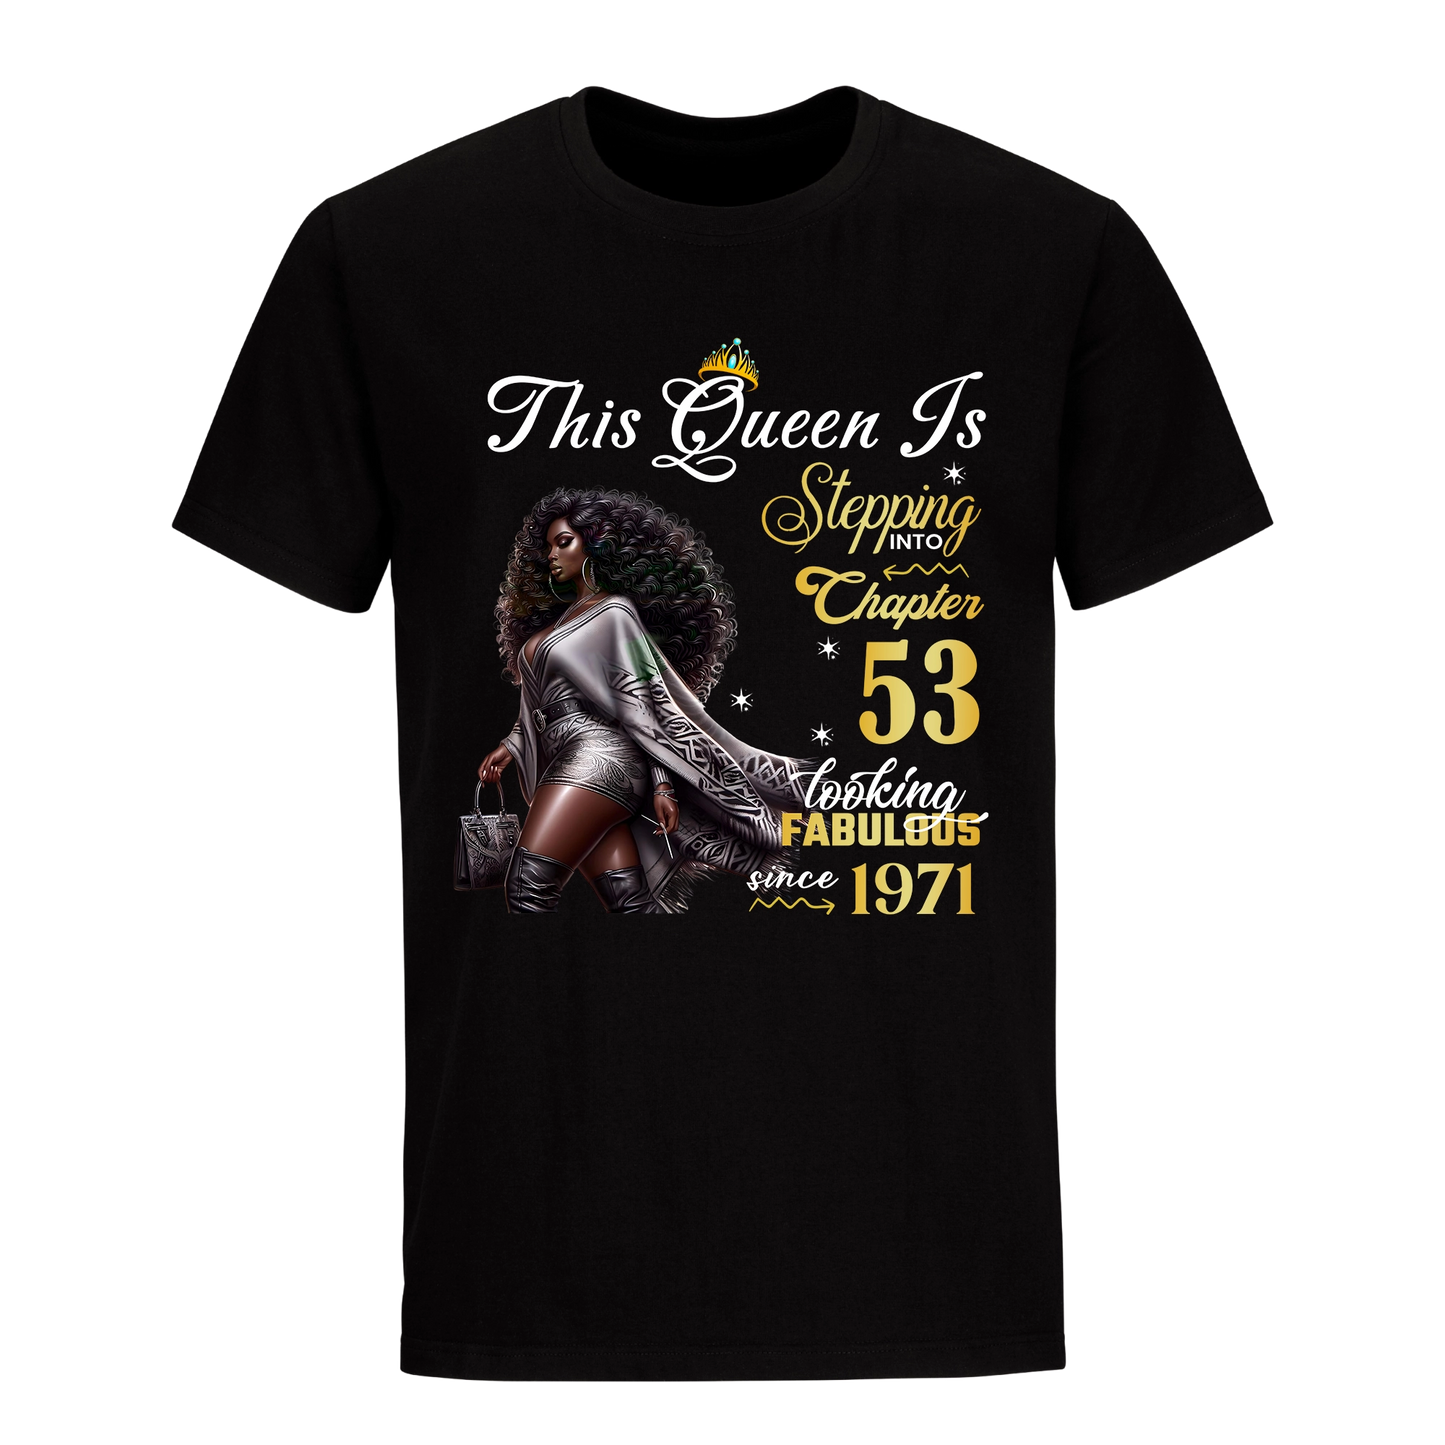 THIS QUEEN IS FABULOUS 53 UNISEX SHIRT